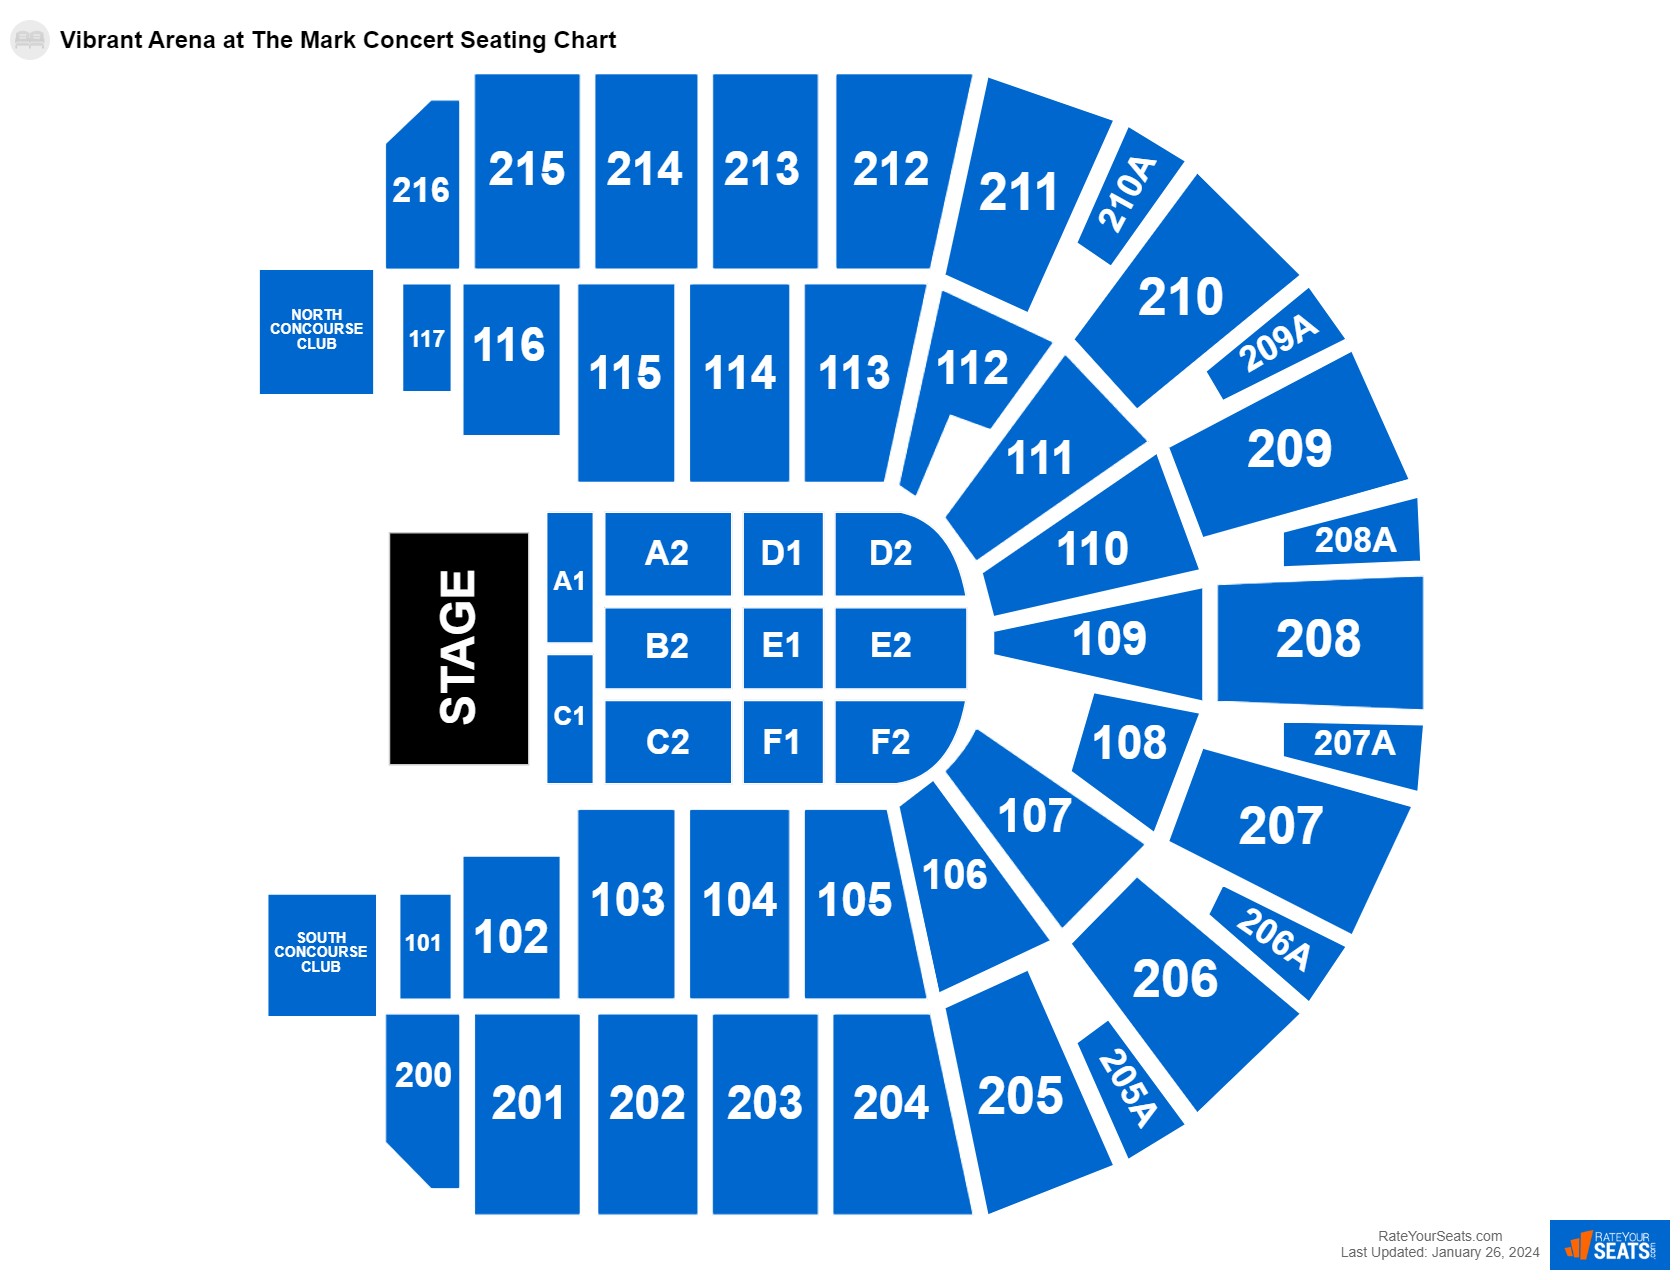 Concert seating chart at Vibrant Arena at The Mark